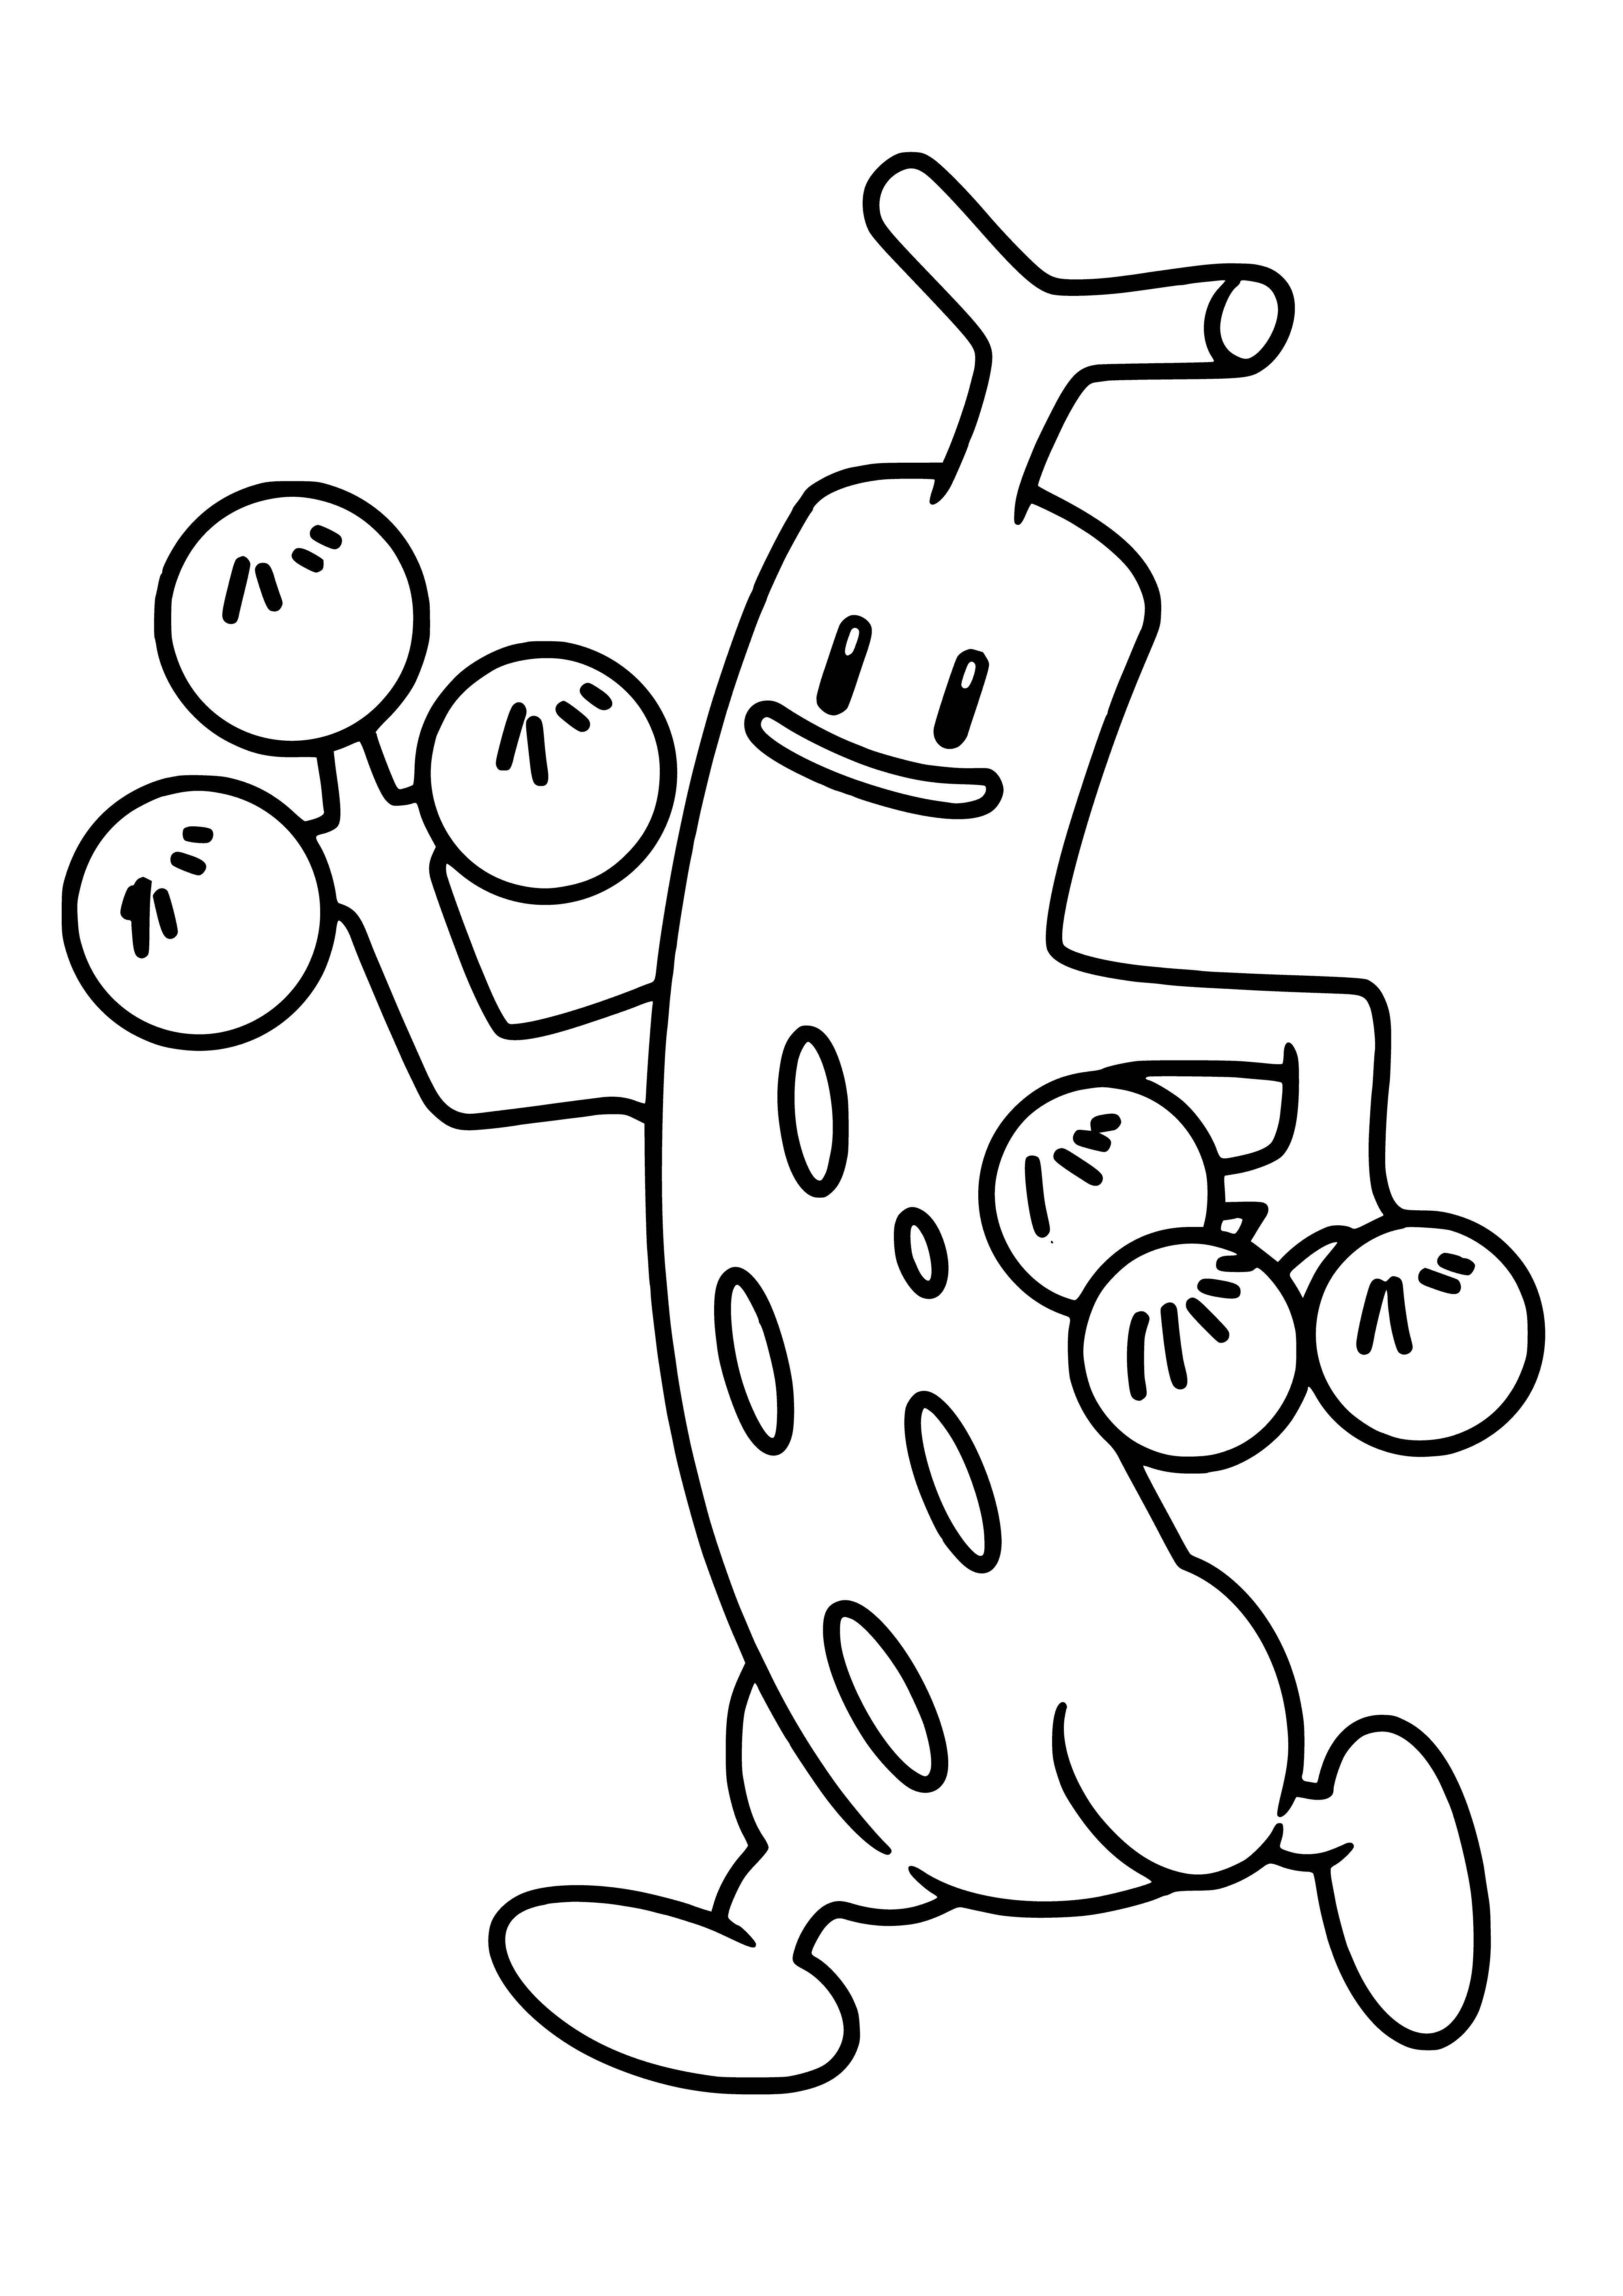 coloring page: Rock-type Pokemon Sudowudo evolves from Bonsly; small, brown with large bulbous head and two large blue eyes. Hands and feet small and stubby.